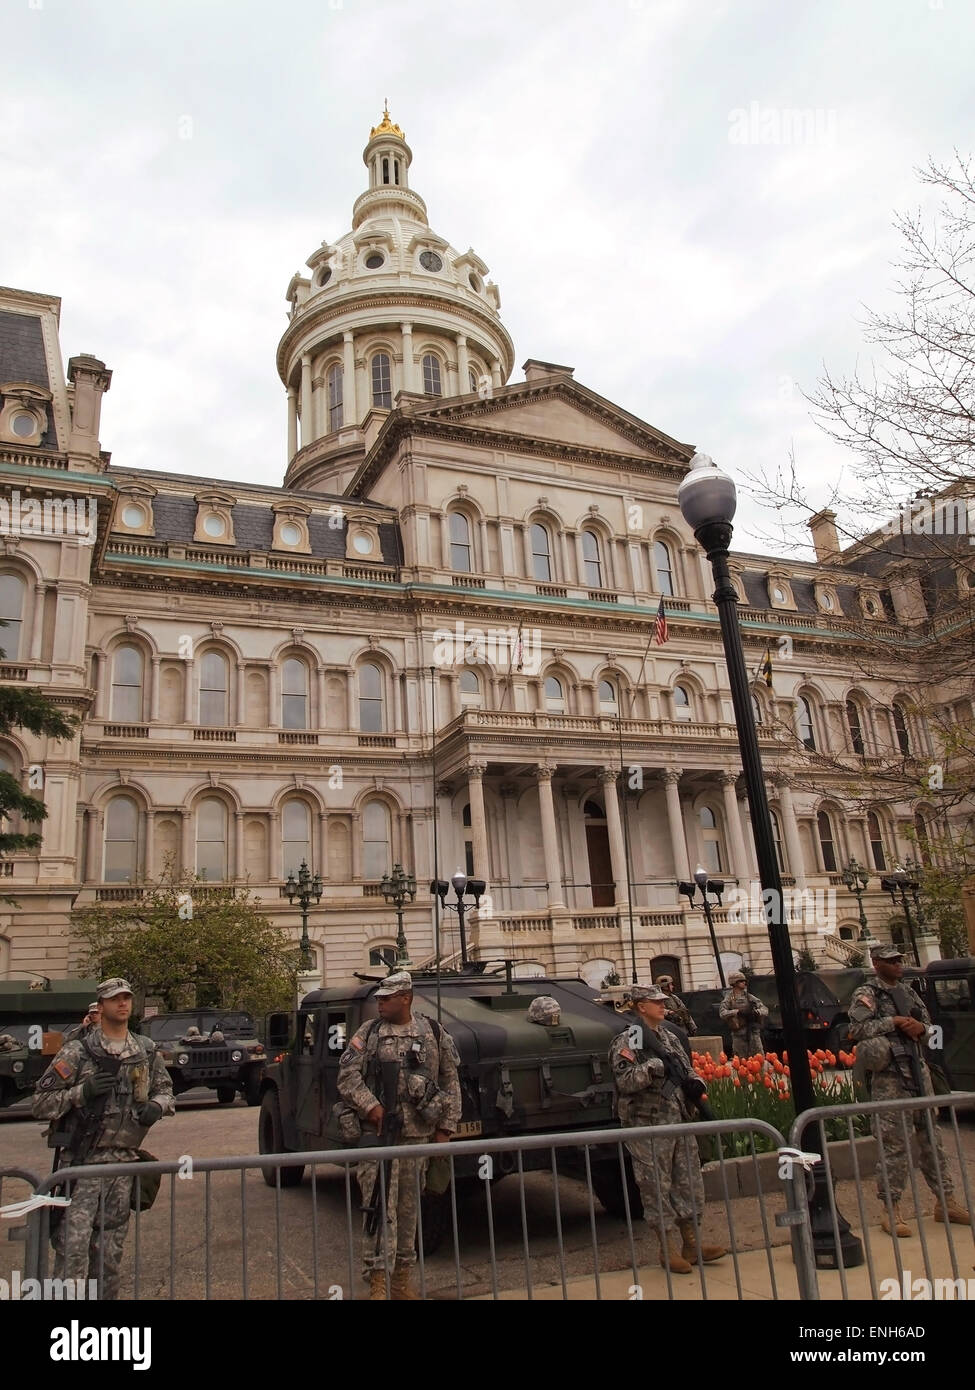 BALTIMORE, MD - MAY 1, 2015: The National Guard surrounds the City Hall  building in Baltimore, MD, on May 1, 2015, during a wee Stock Photo